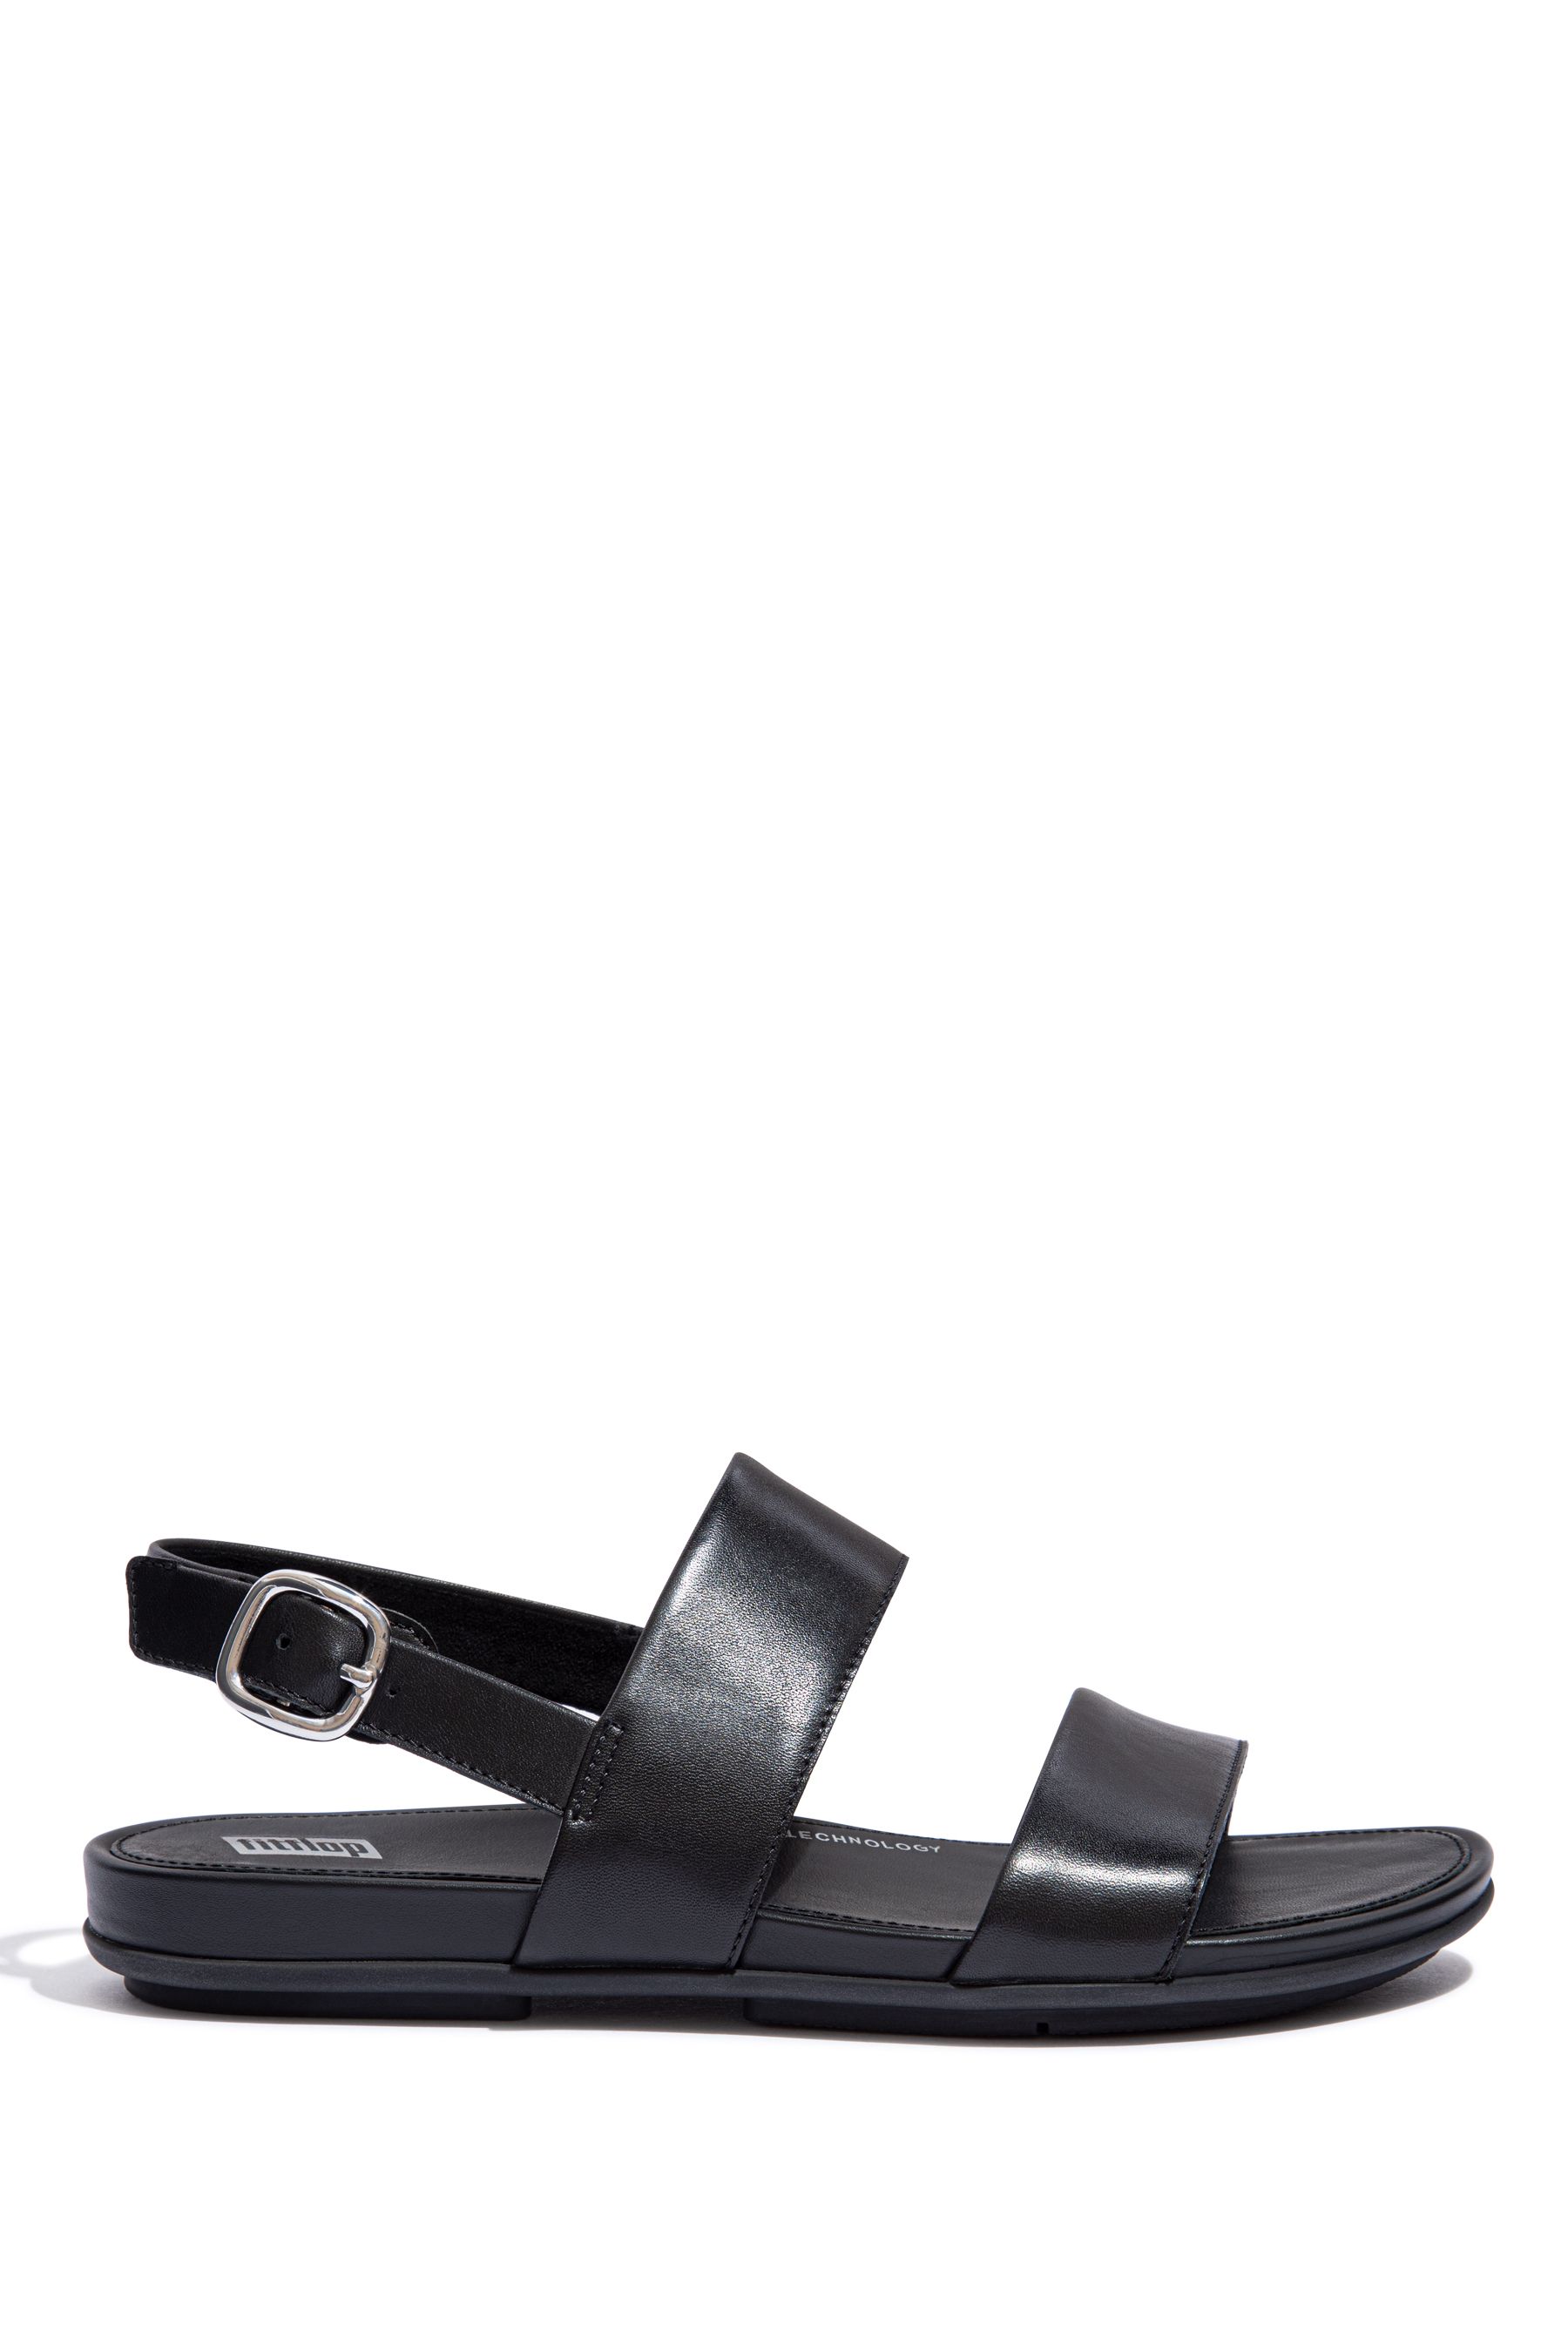 Buy FitFlop Gracie Black Leather Back-Strap Sandals from the Next UK ...